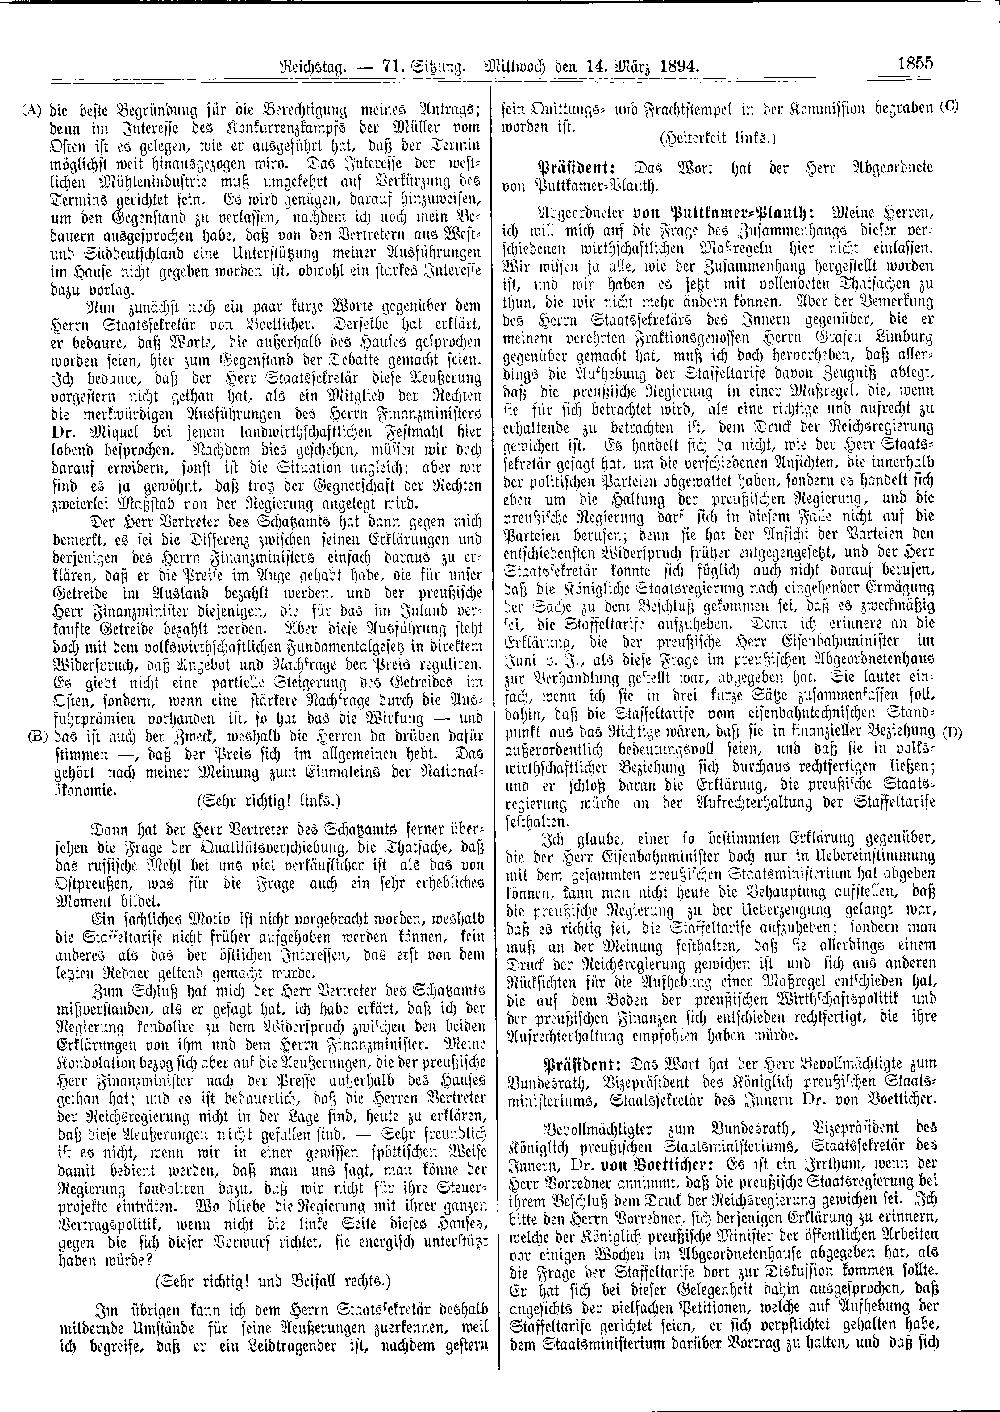 Scan of page 1855